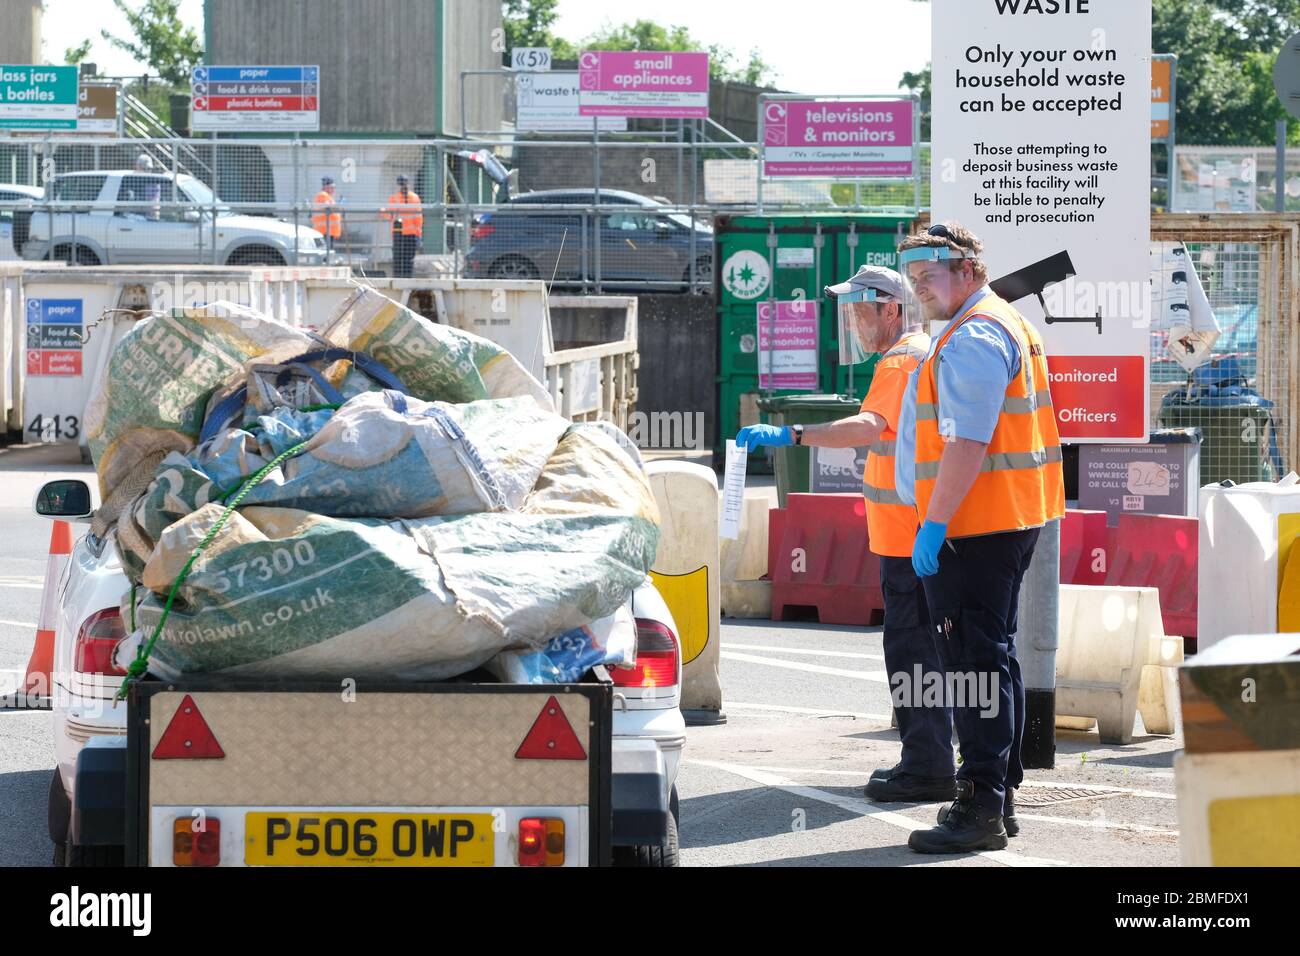 Hereford, Herefordshire UK - Saturday 9th May 2020 - Herefordshire Council has re-opened two recycling centres to the public today across the county. Recycling centre staff wearing protective PPE instruct visitors on the site protocol as they arrive. Recycling Centres have been shut since Britain entered lockdown at the end of March 2020. Photo Steven May / Alamy Live News Stock Photo